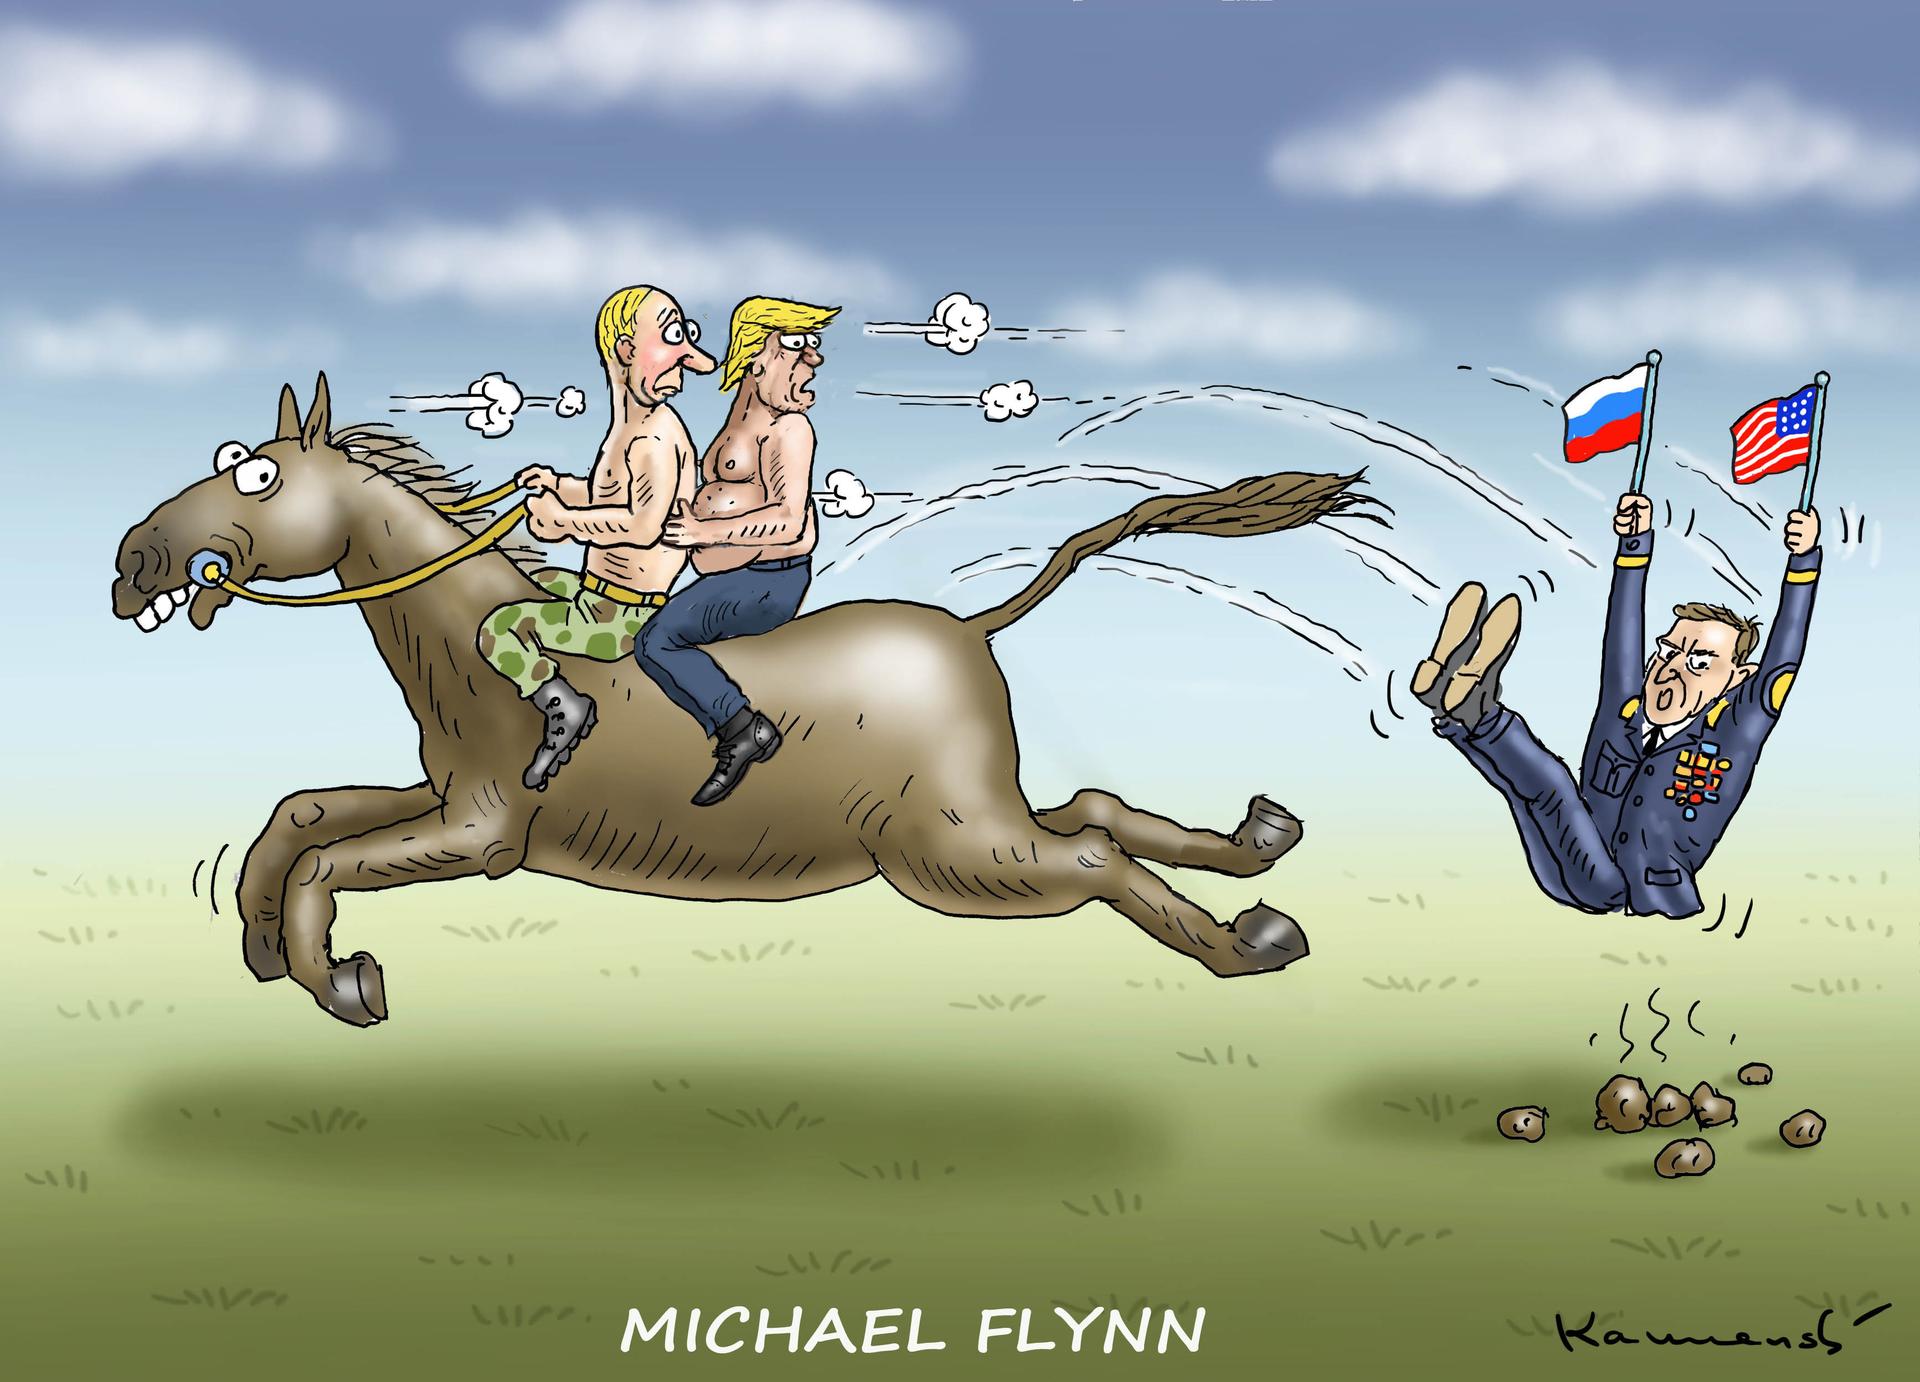 He's with us. He's with us. Oh dear, he's gone! Vladimir Putin and President Trump react to the resignation of Michael Flynn as National Security adviser.